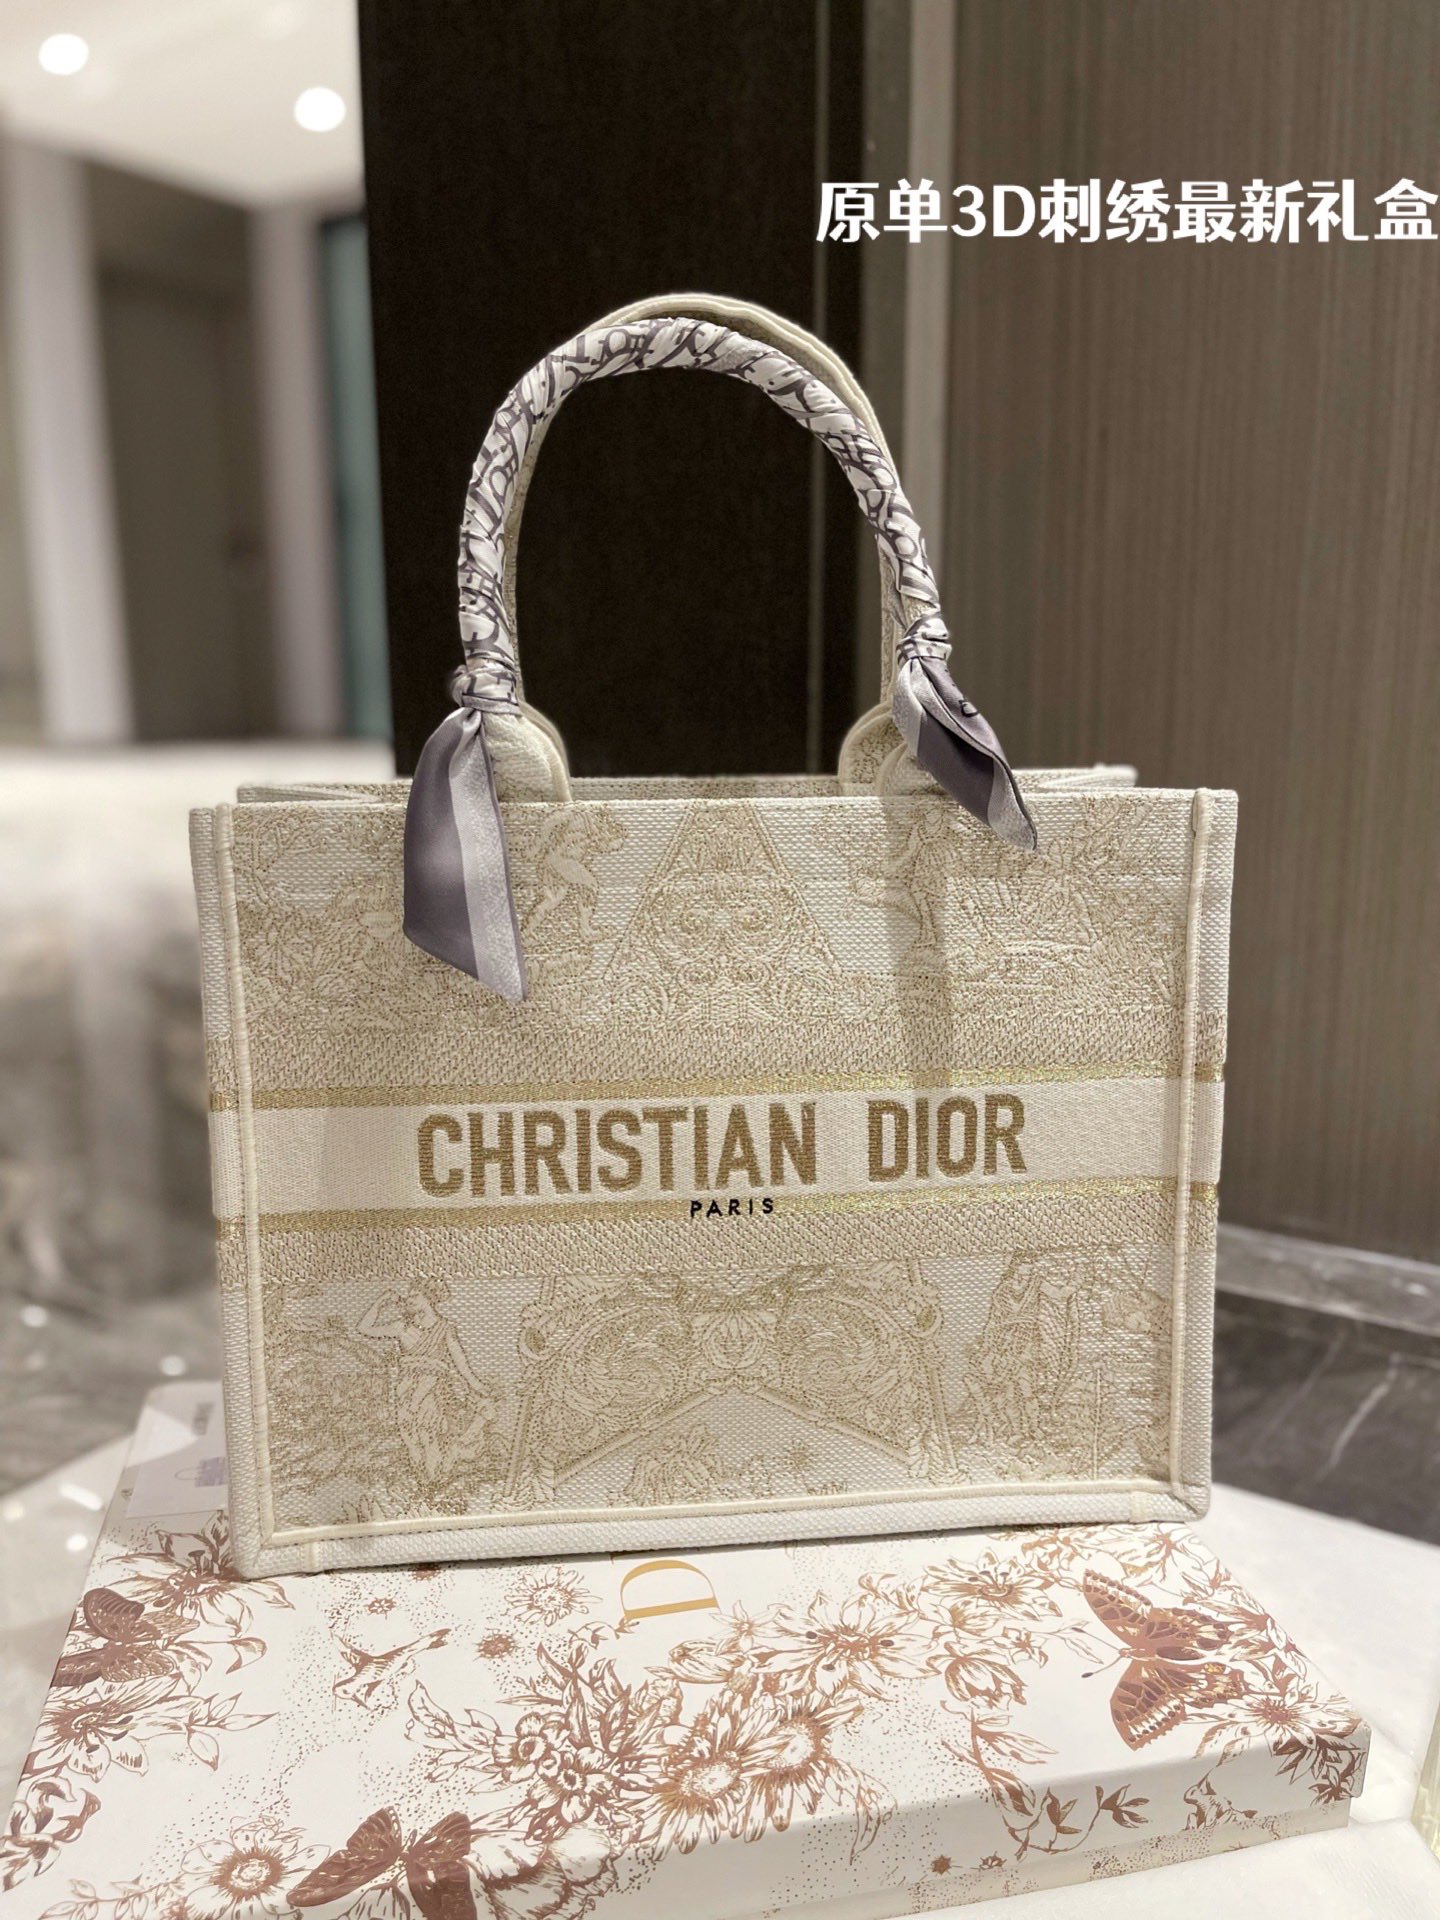 Dior Handbags Tote Embroidered Shopping Bags